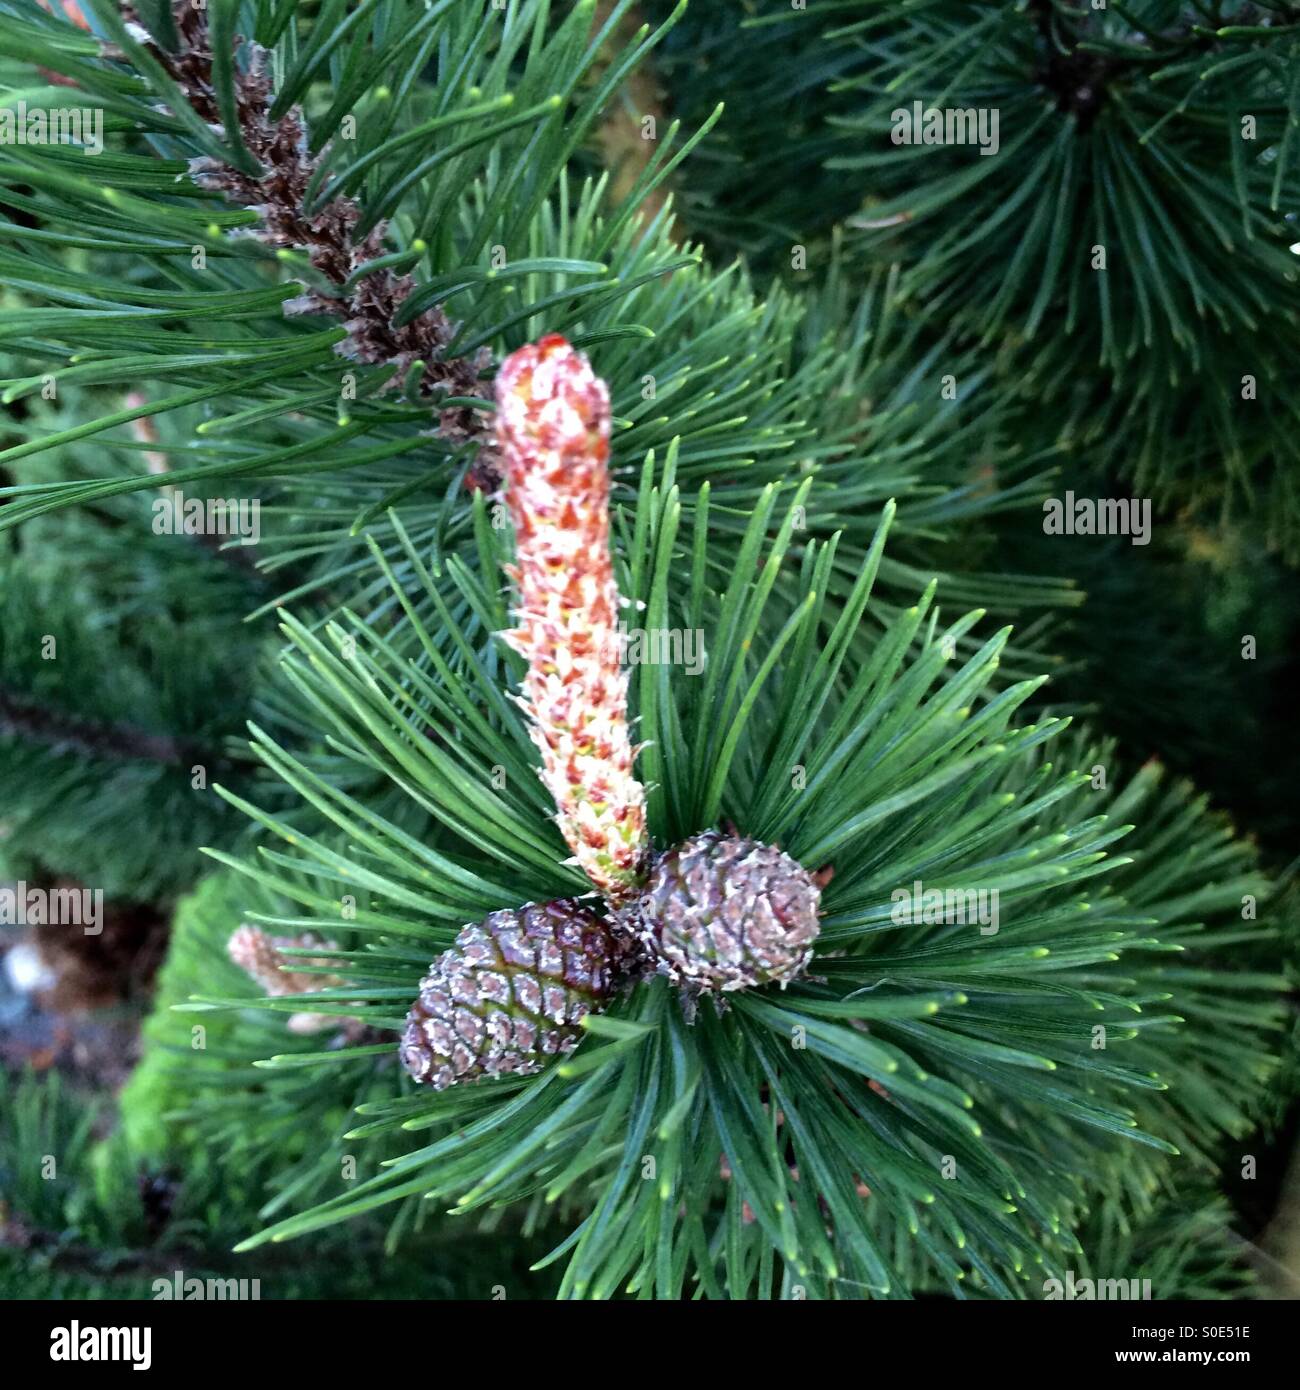 Pine seeds in suggestive formation Stock Photo